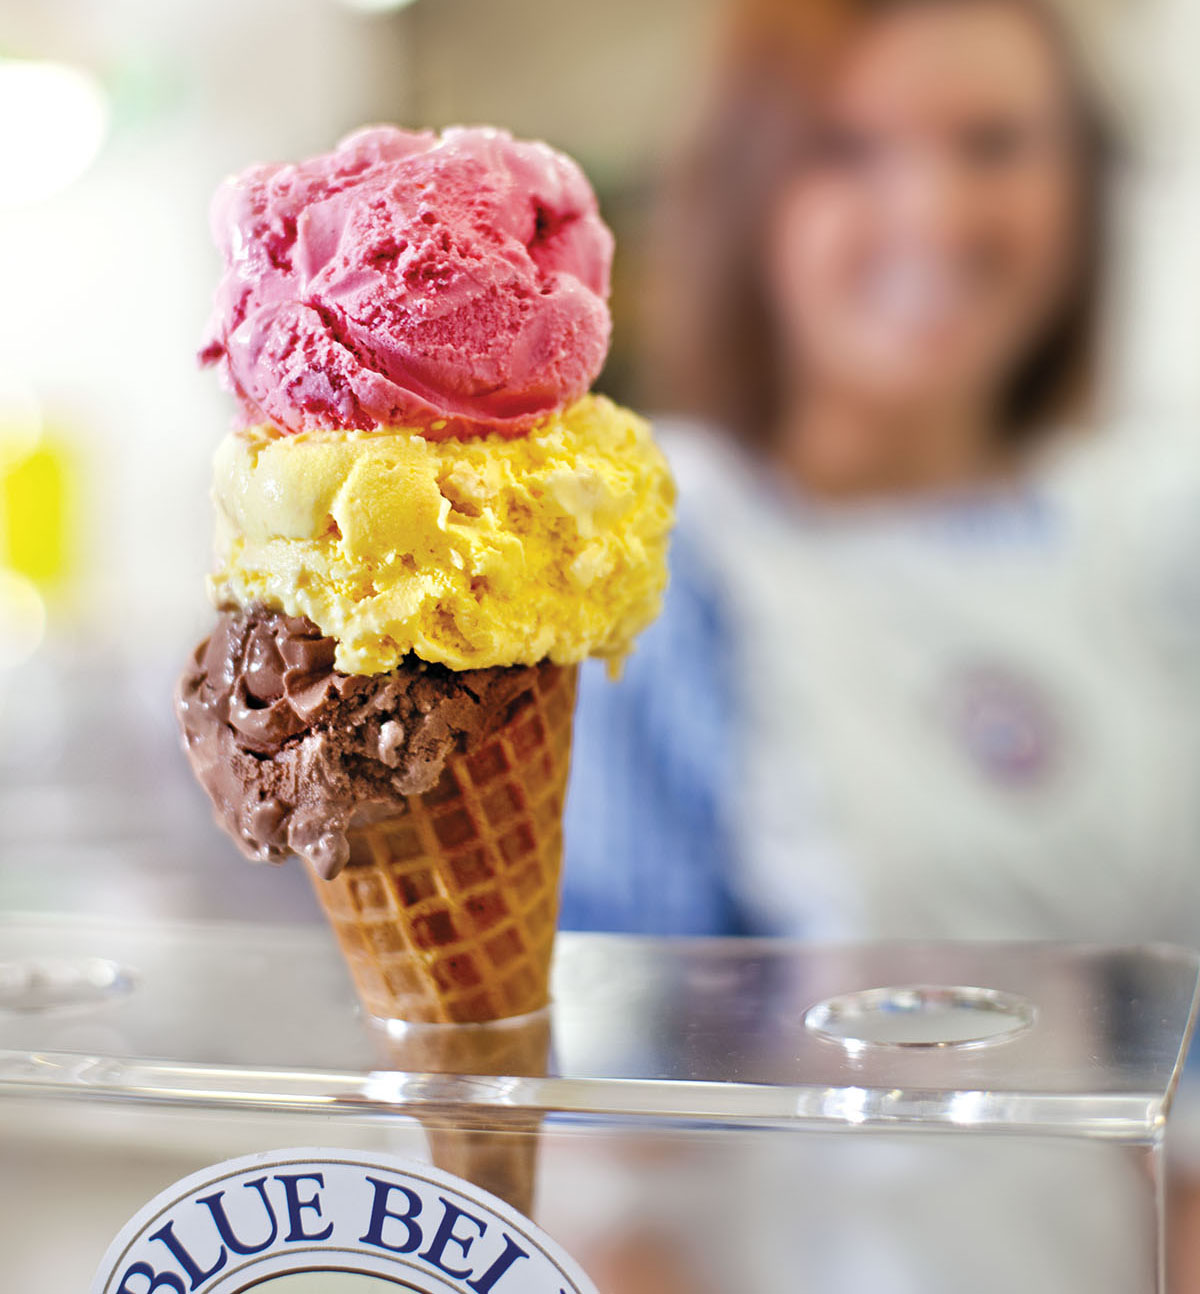 A waffle cone of ice cream filled with bright pink, yellow, and brown scoops